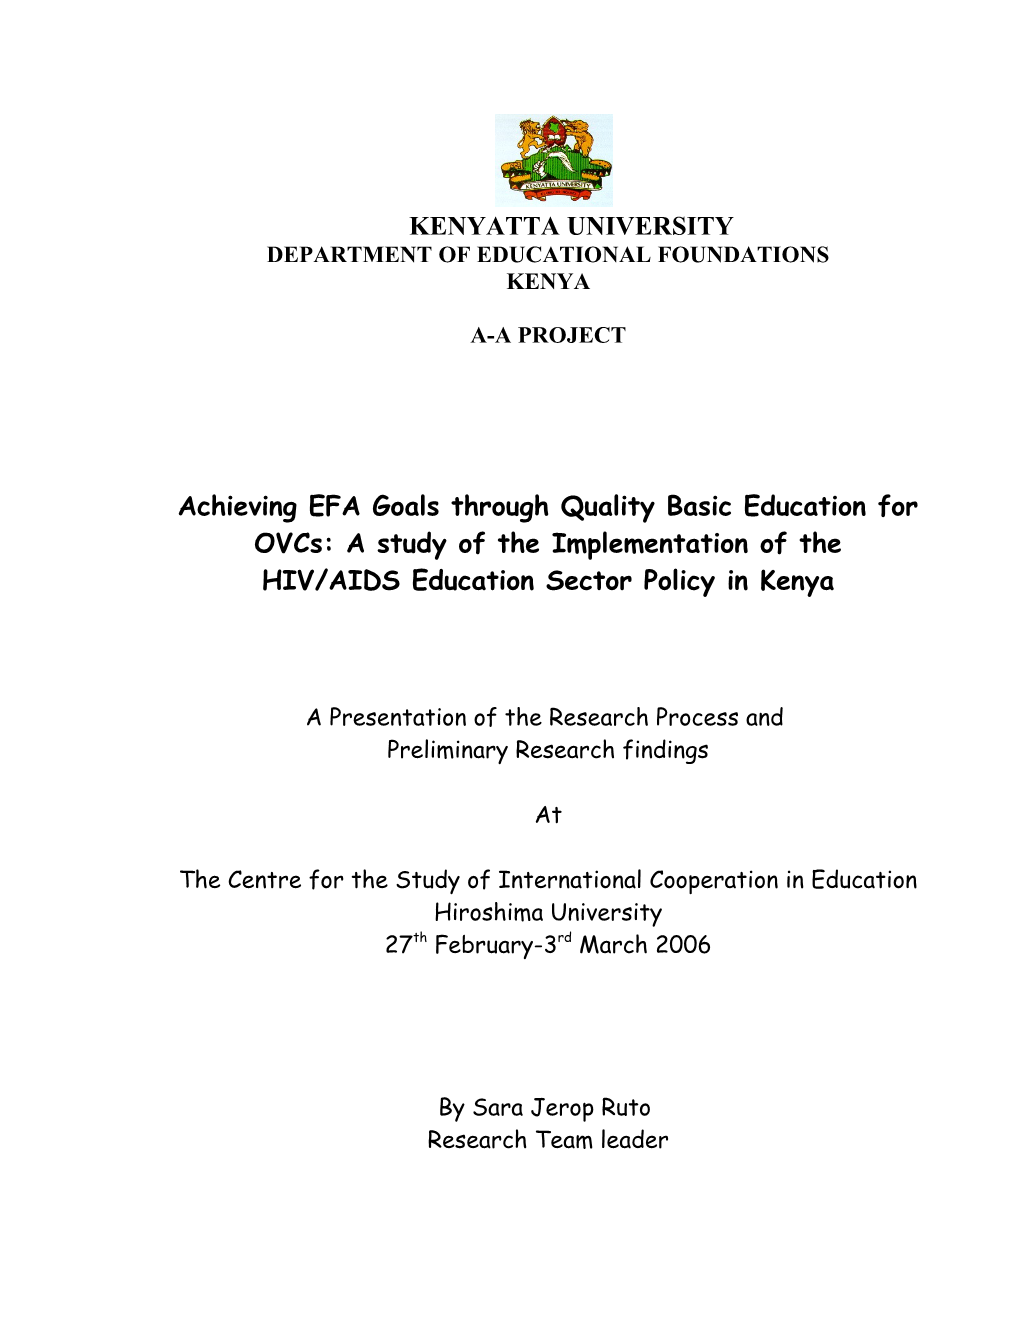 HIV/AIDS Education Sector Policy in Kenya